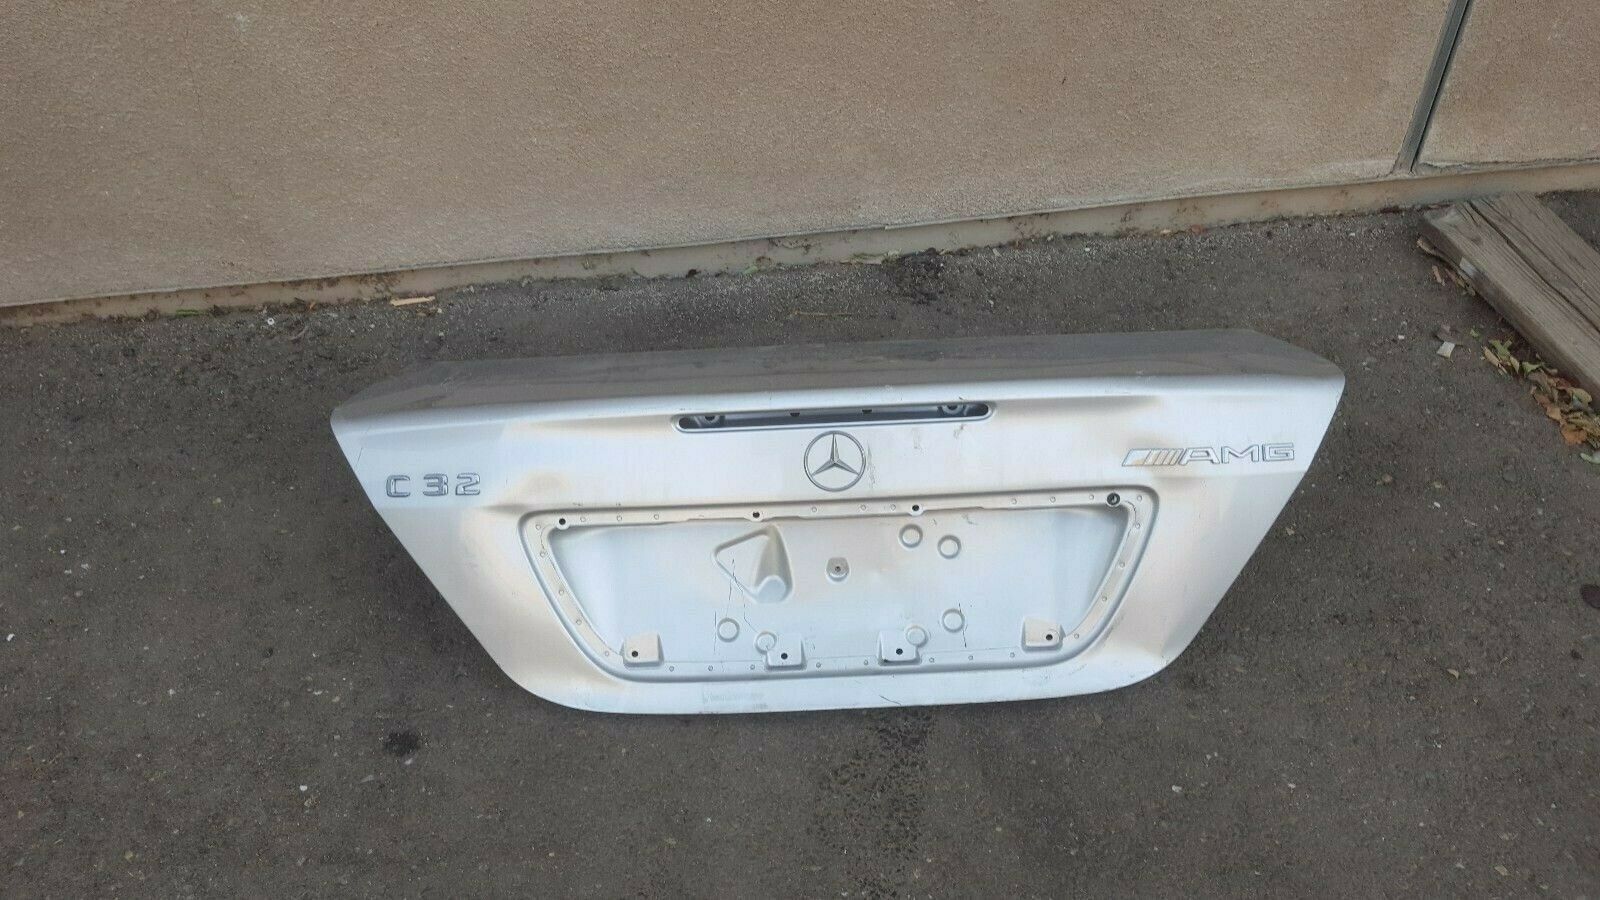 01 02 03 04 05 06 07 MERCEDES C CLASS C230 C280 C32 C55 AMG TRUNK LID DECK TRUNKLID LIFT TAIL GATE LIFTGATE TAILGATE OEM USED